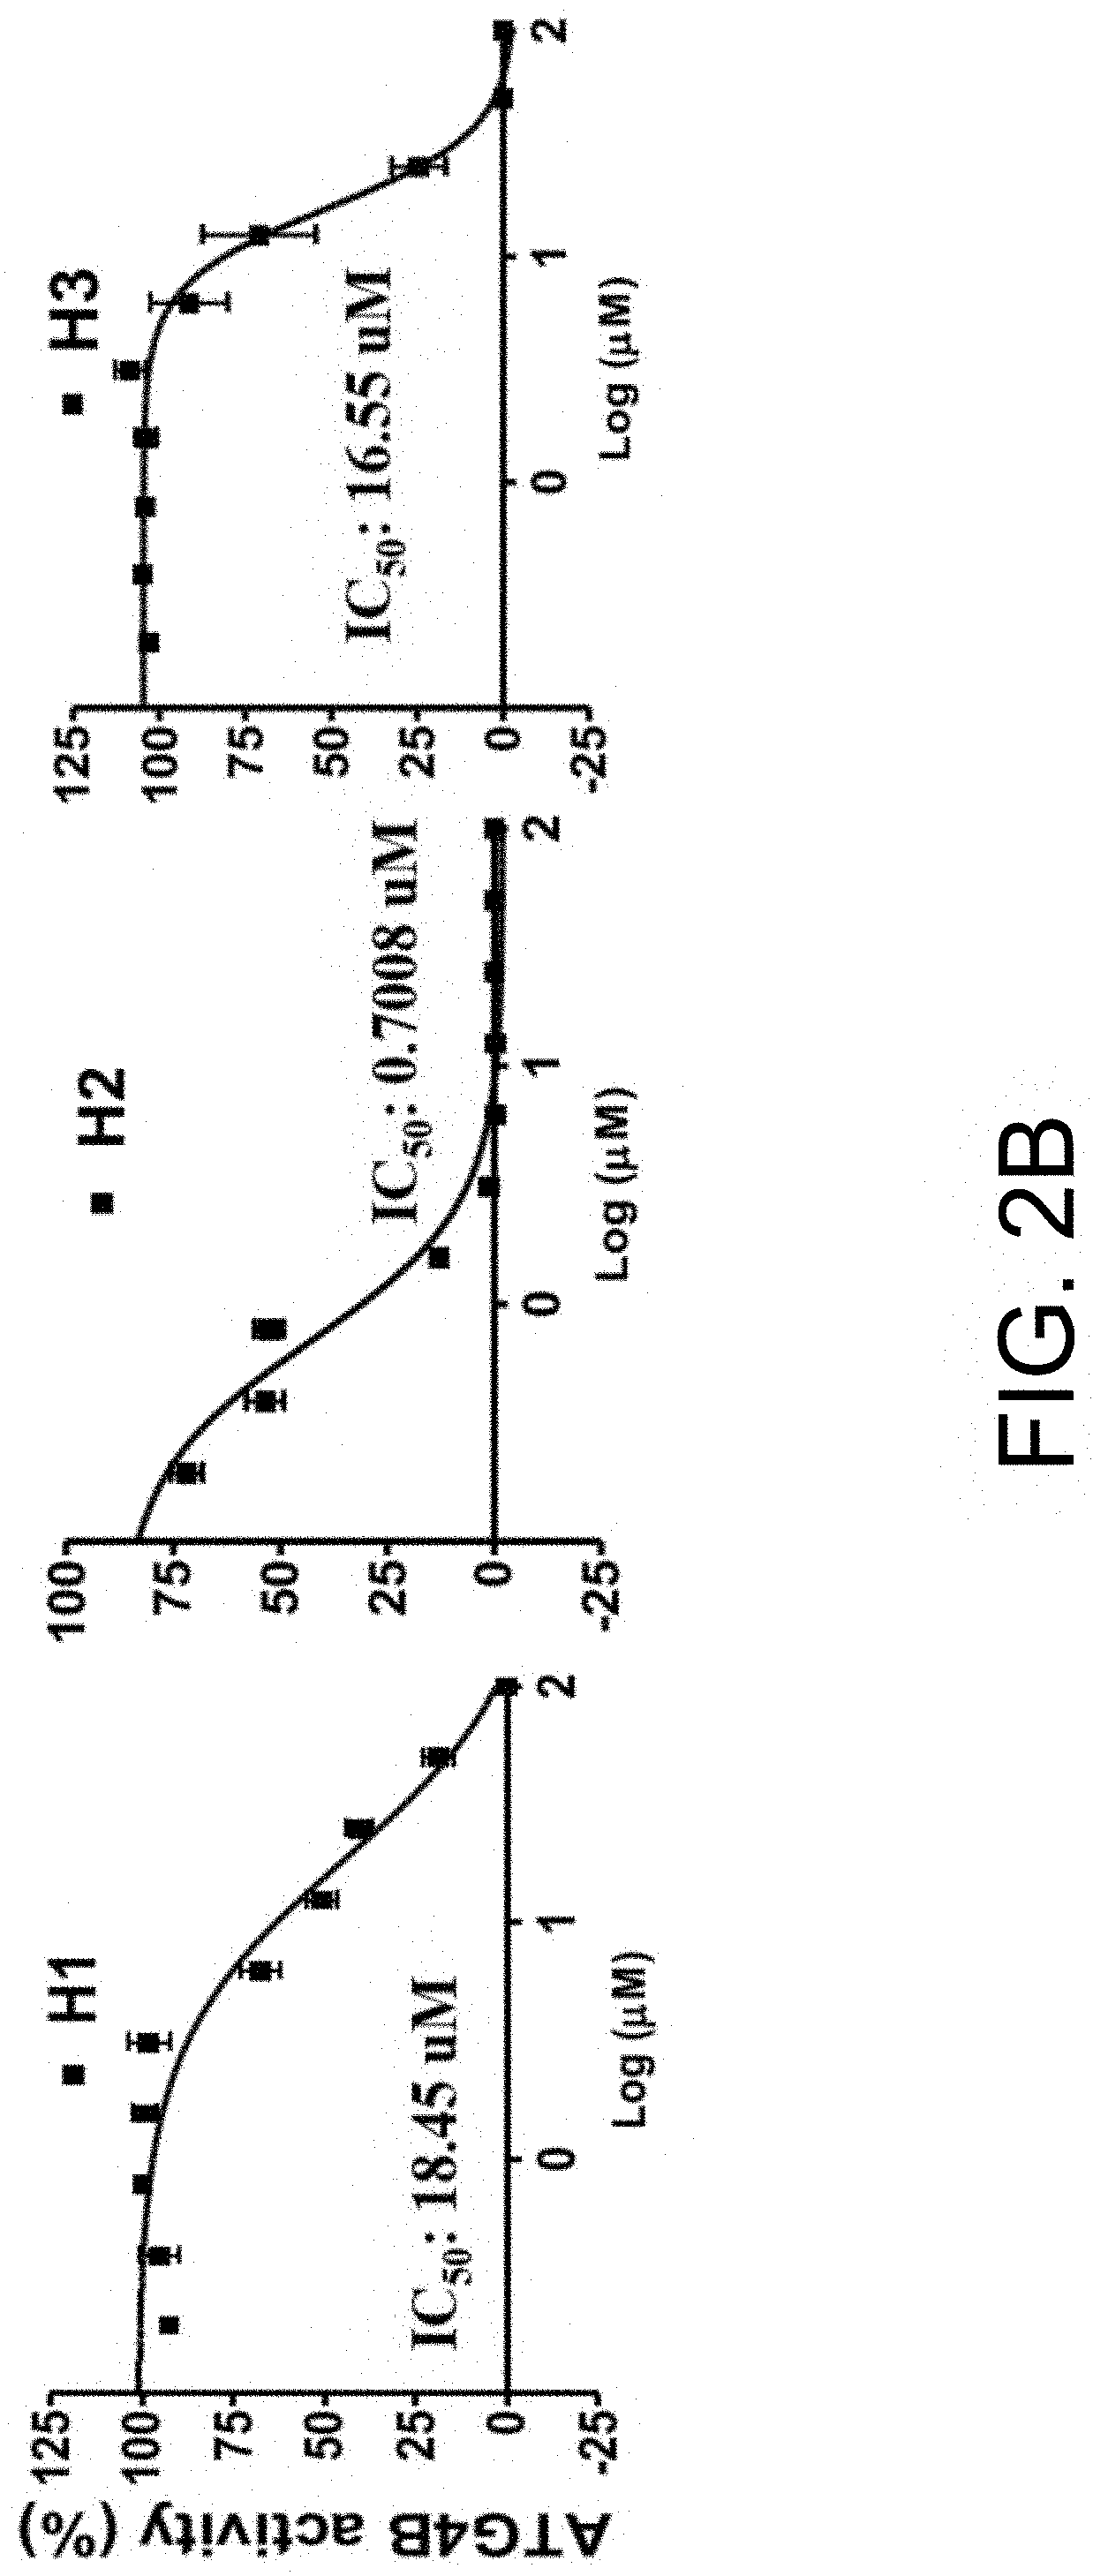 Isolated peptide, anti-cancer medicinal composition including the same and method of specifically reducing or inhibiting activities of cancer cells using the same